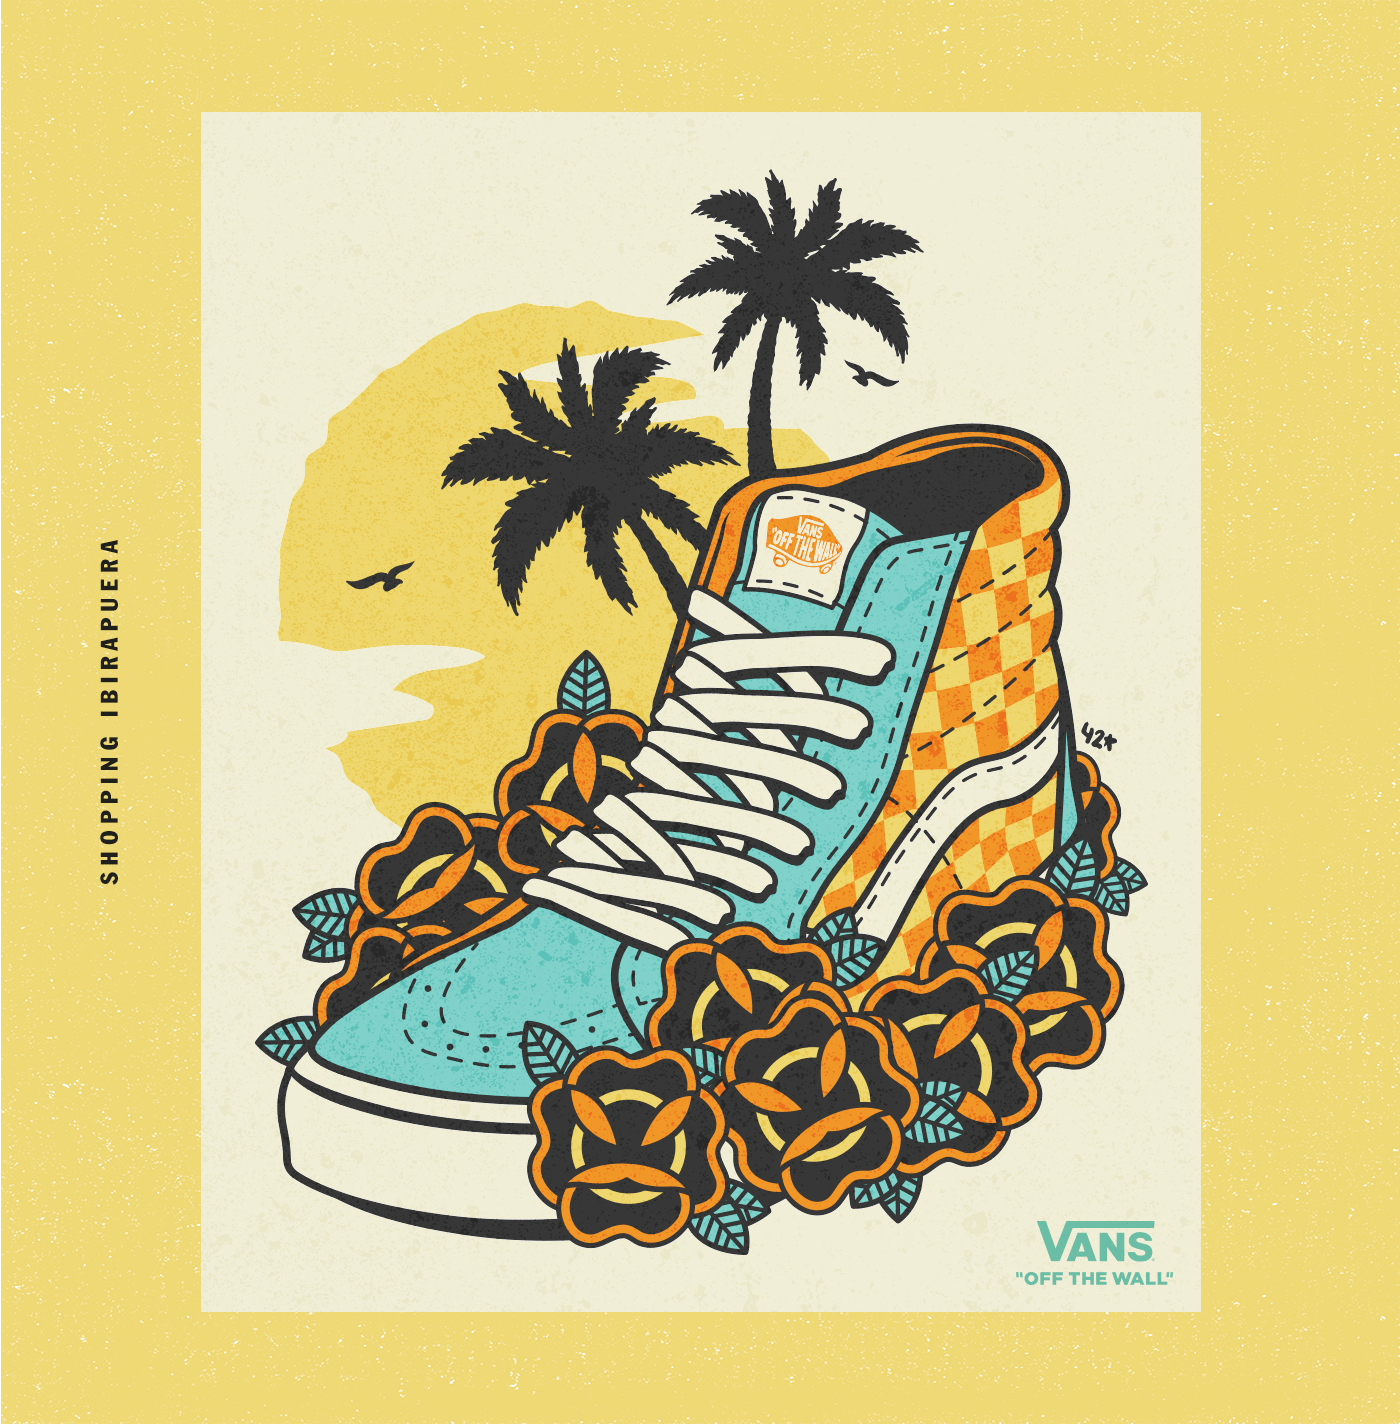 VANS - OFF THE WALL on